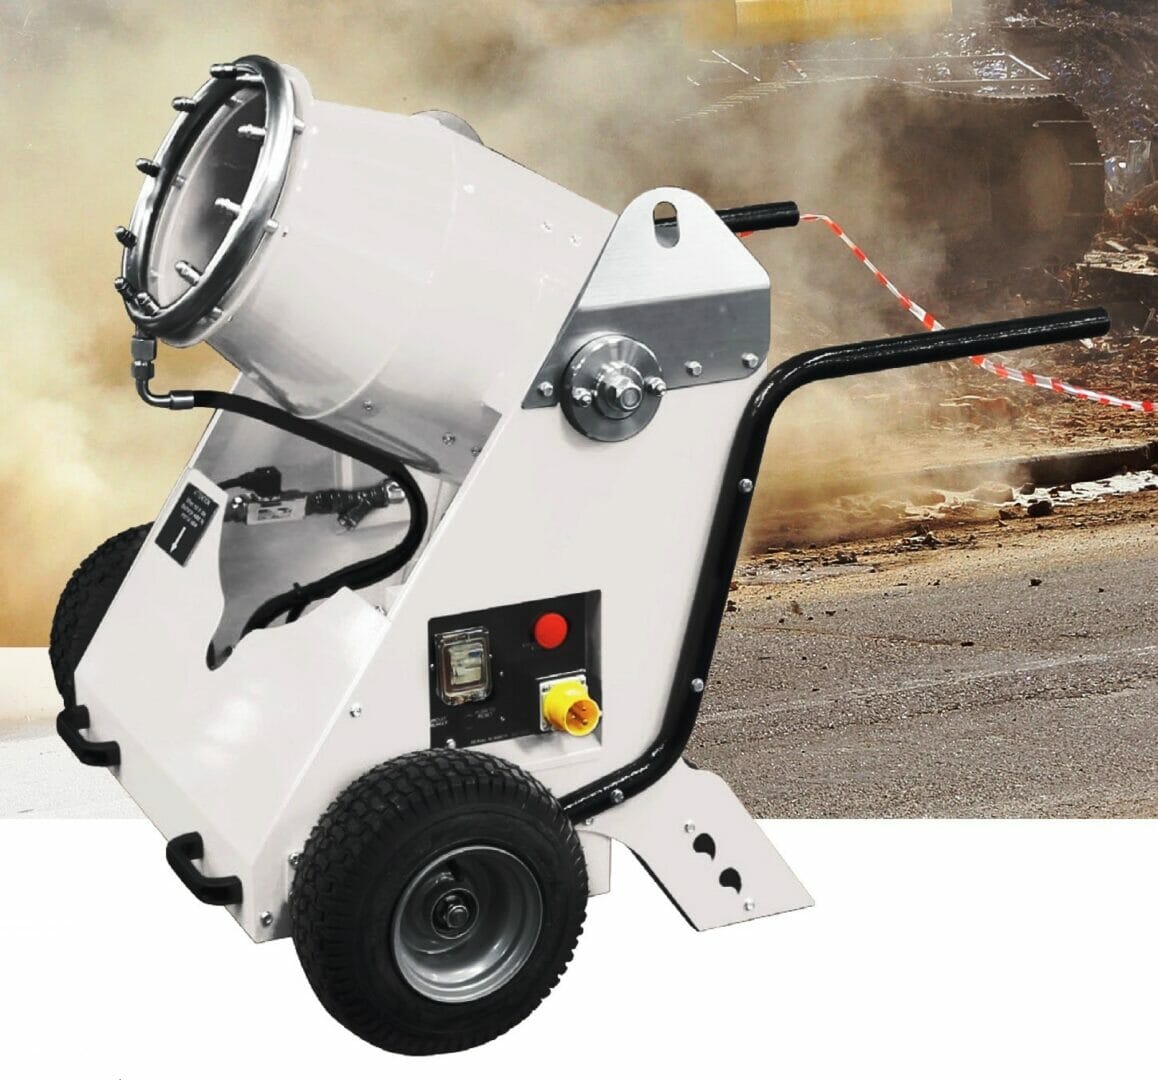 Start fighting dust with Trime’s X-DUST FIGHTER – portable site dust suppression @TrimeUK